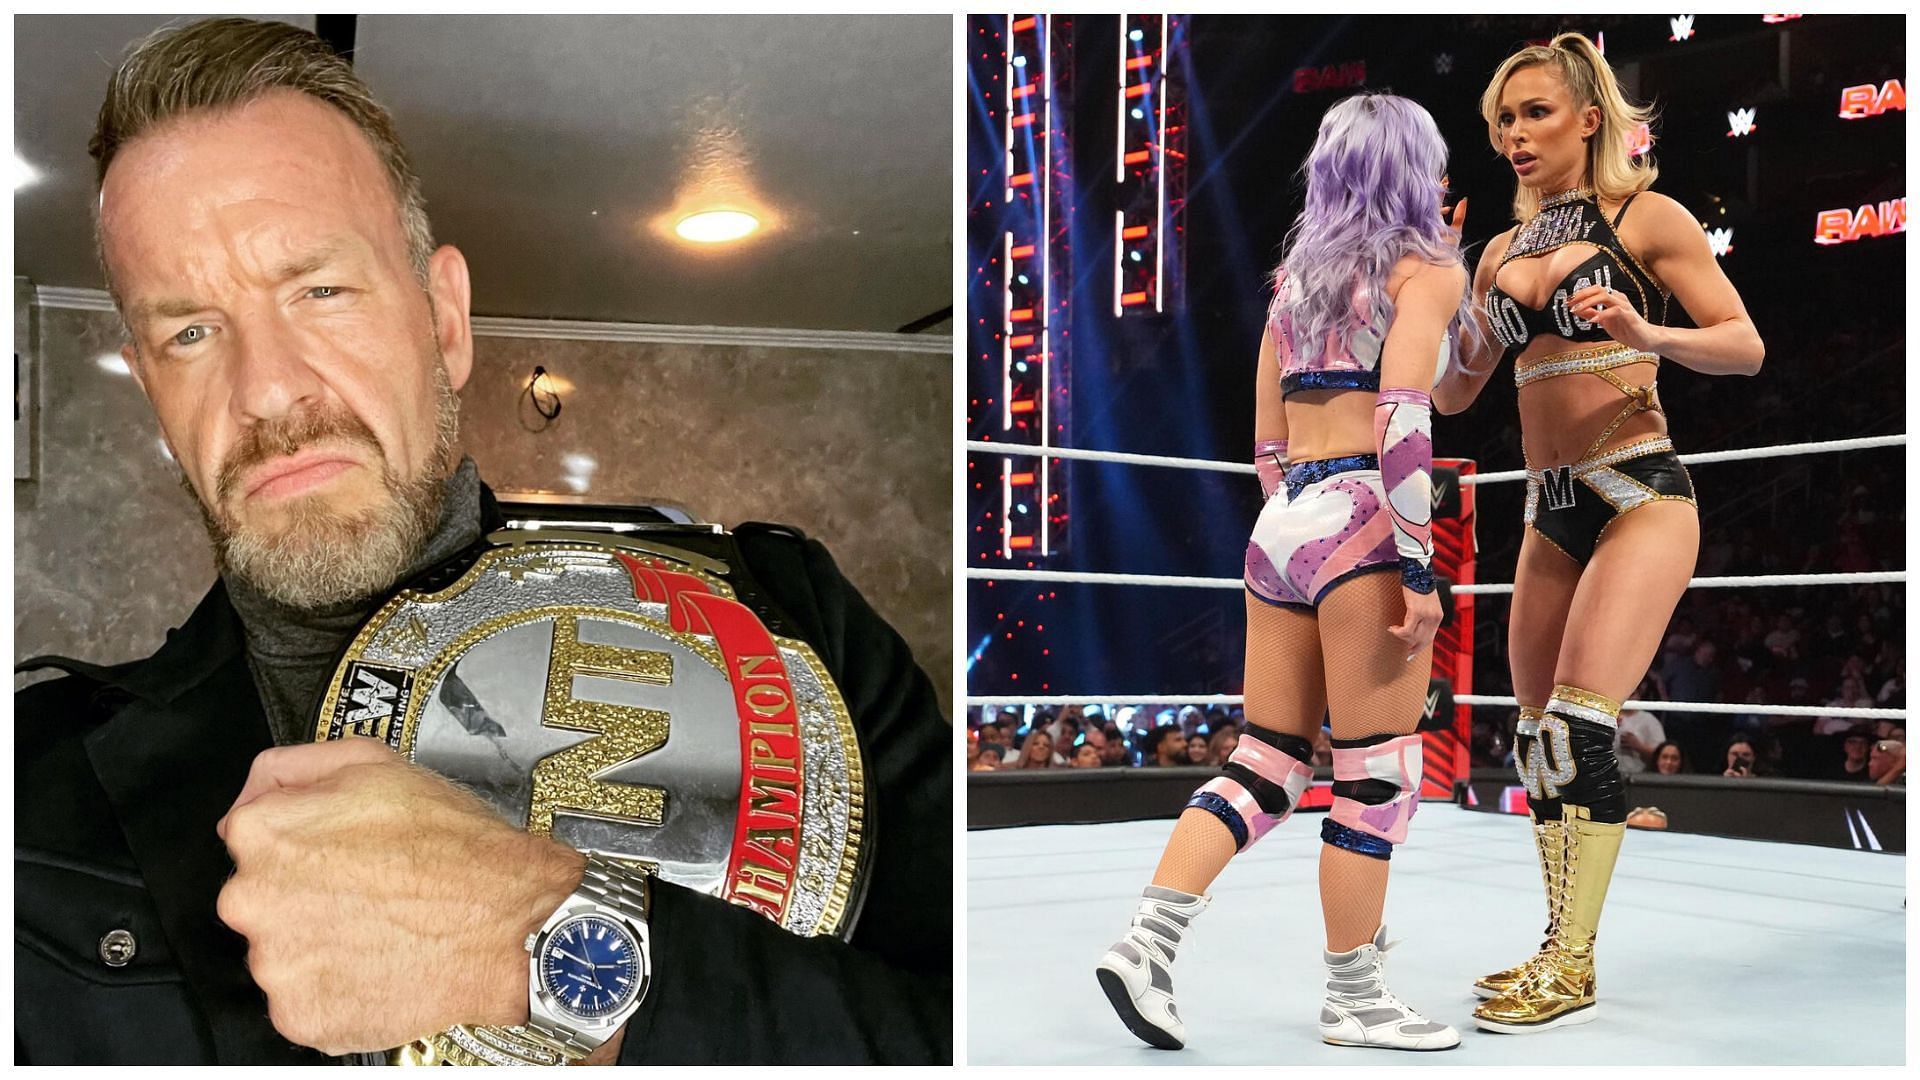 Christian Cage (left) and Candice LeRae &amp; Maxxine Dupri on WWE RAW (right).